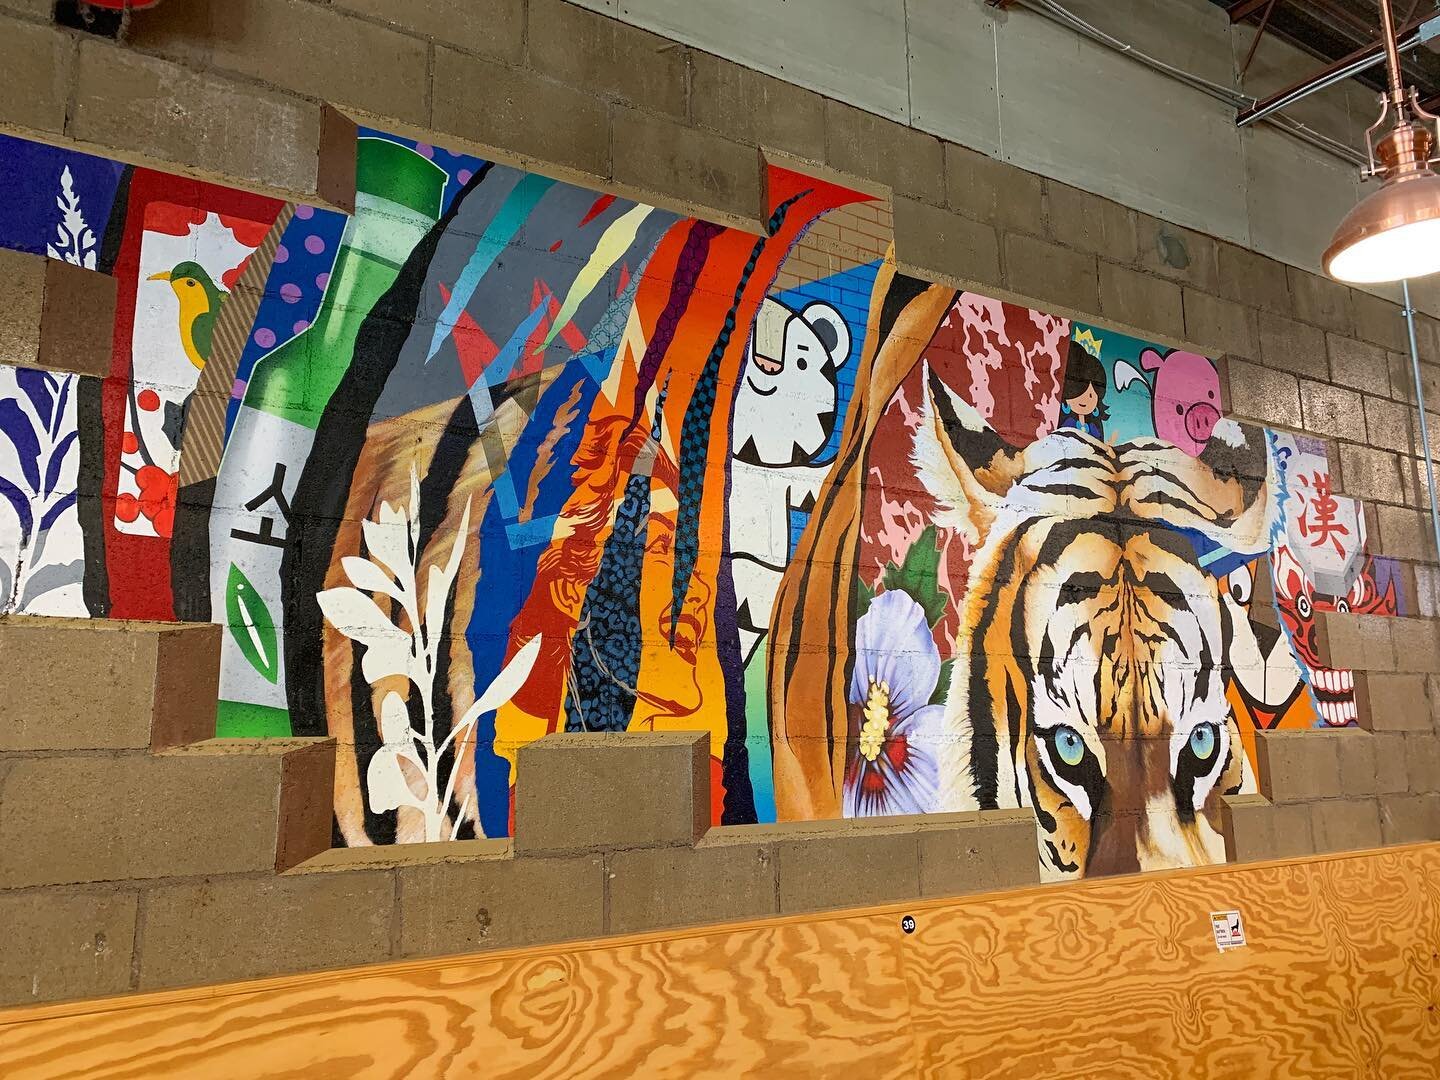 Big thanks to everyone who comes to celebrate their special day with us. Whether it&rsquo;s a birthday, graduation, anniversary, or just because&hellip; we think you all are grrrrreat! 😍🎉🙌🏼
.
(Mural by Matt Moore @puckmcgruff) #cltmurals #tigerar